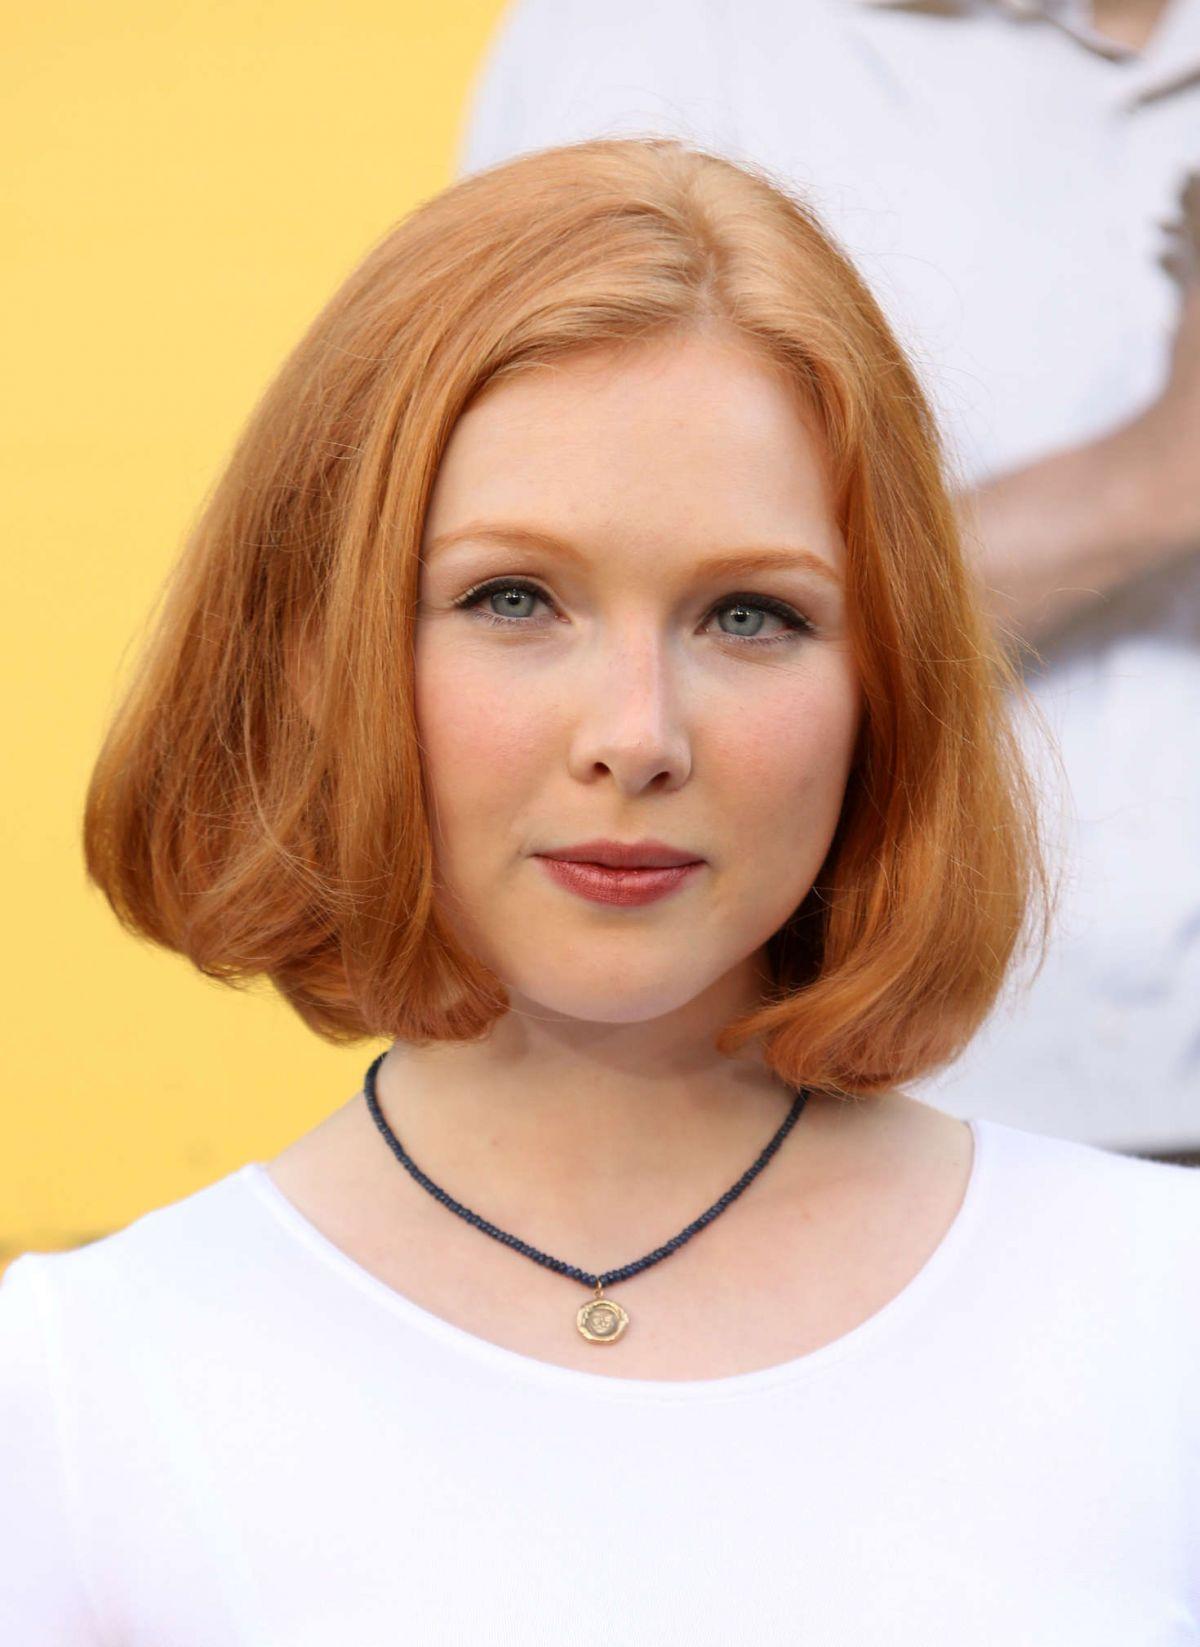 70+ Hot Pictures Of Molly C. Quinn Are God’s Gift For Her Die Hard Fans 29